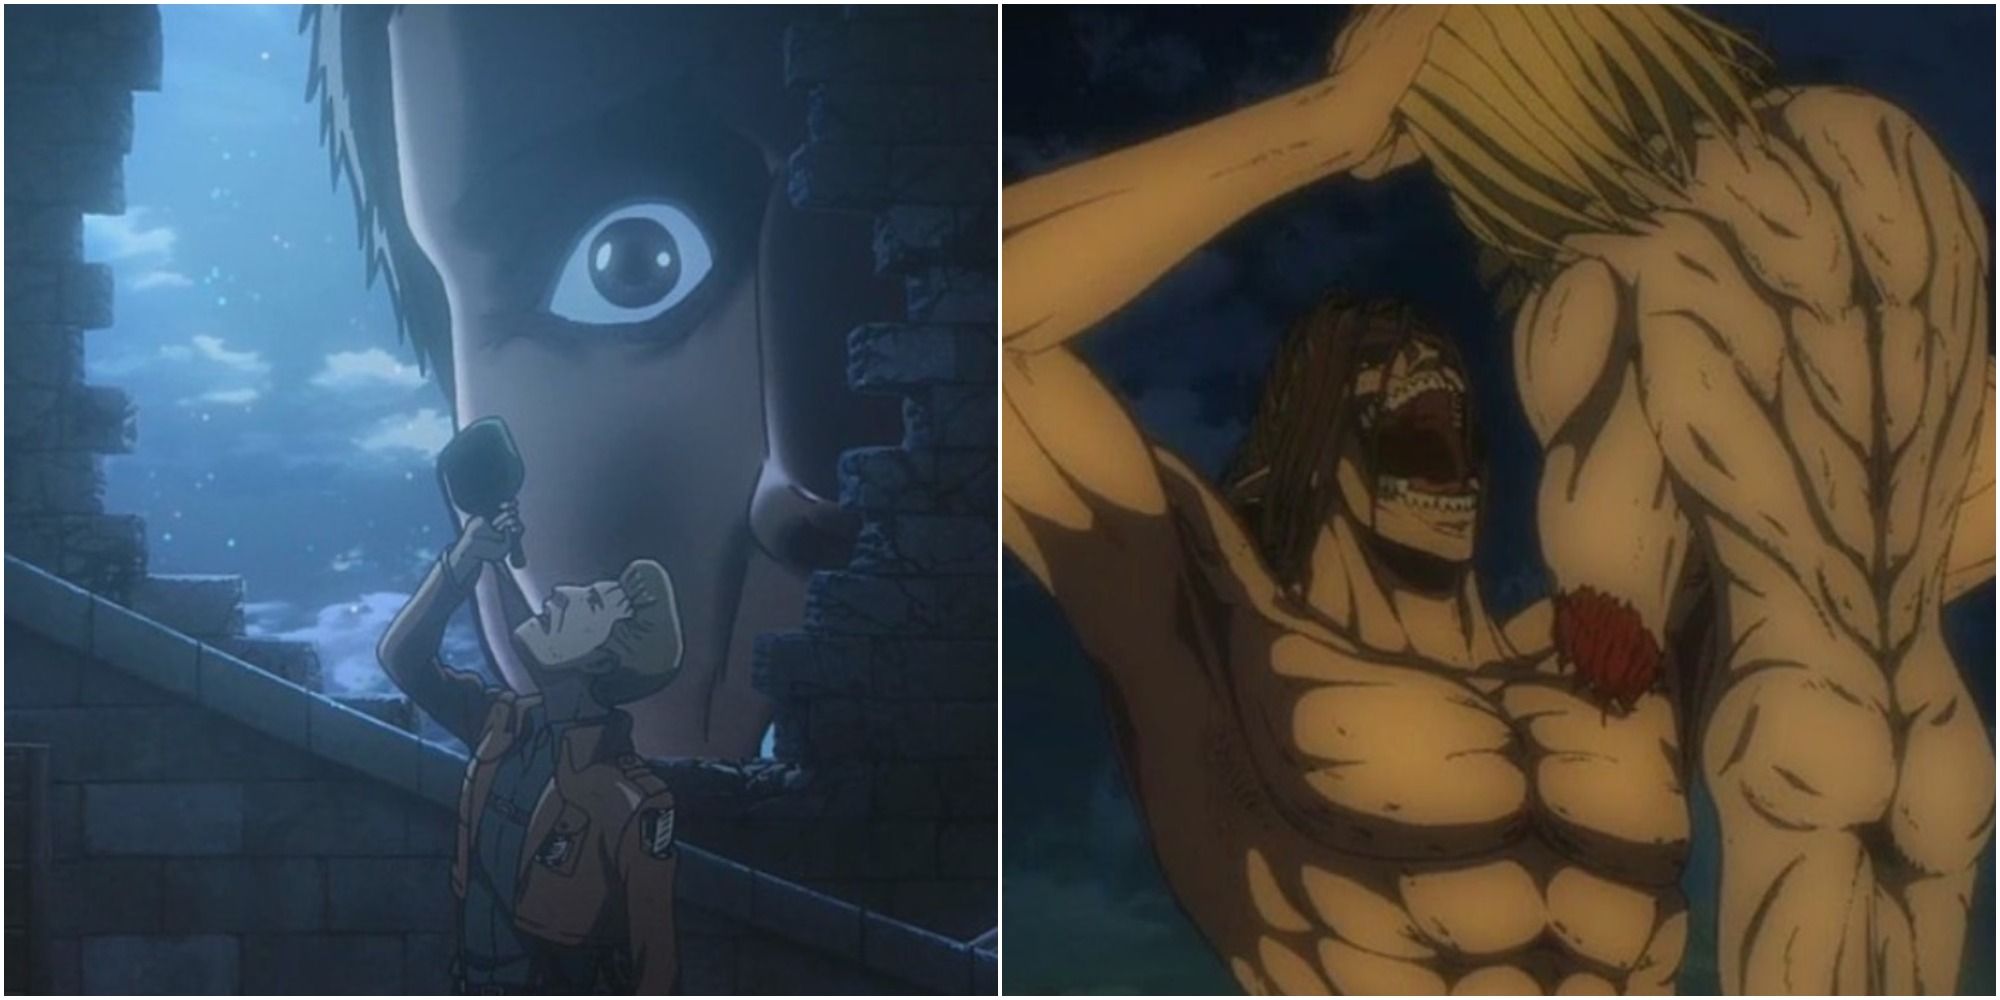 Attack On Titan And 8 Other Anime That Got Too Dark